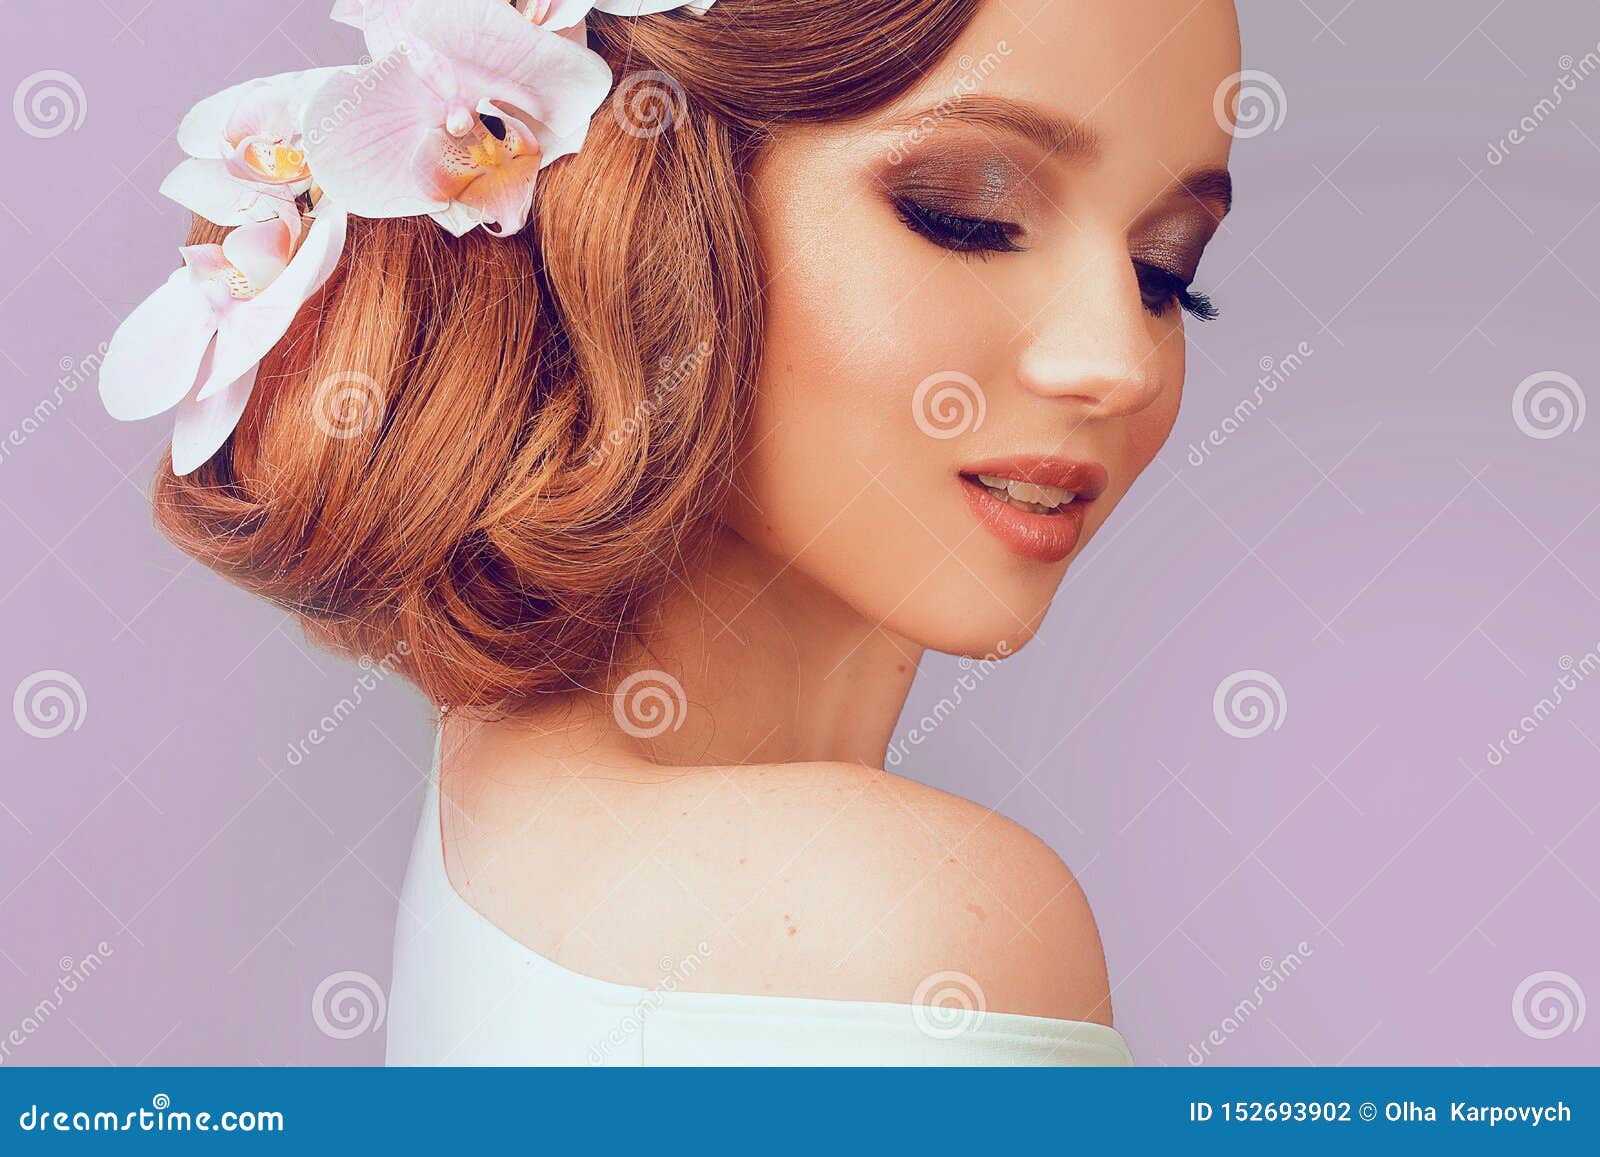 Beauty Summer Model Girl with Colorful Flowers Hair Style. Beautiful Lady  with Blooming Flowers on Her Head Stock Photo - Image of head, curly:  152693902